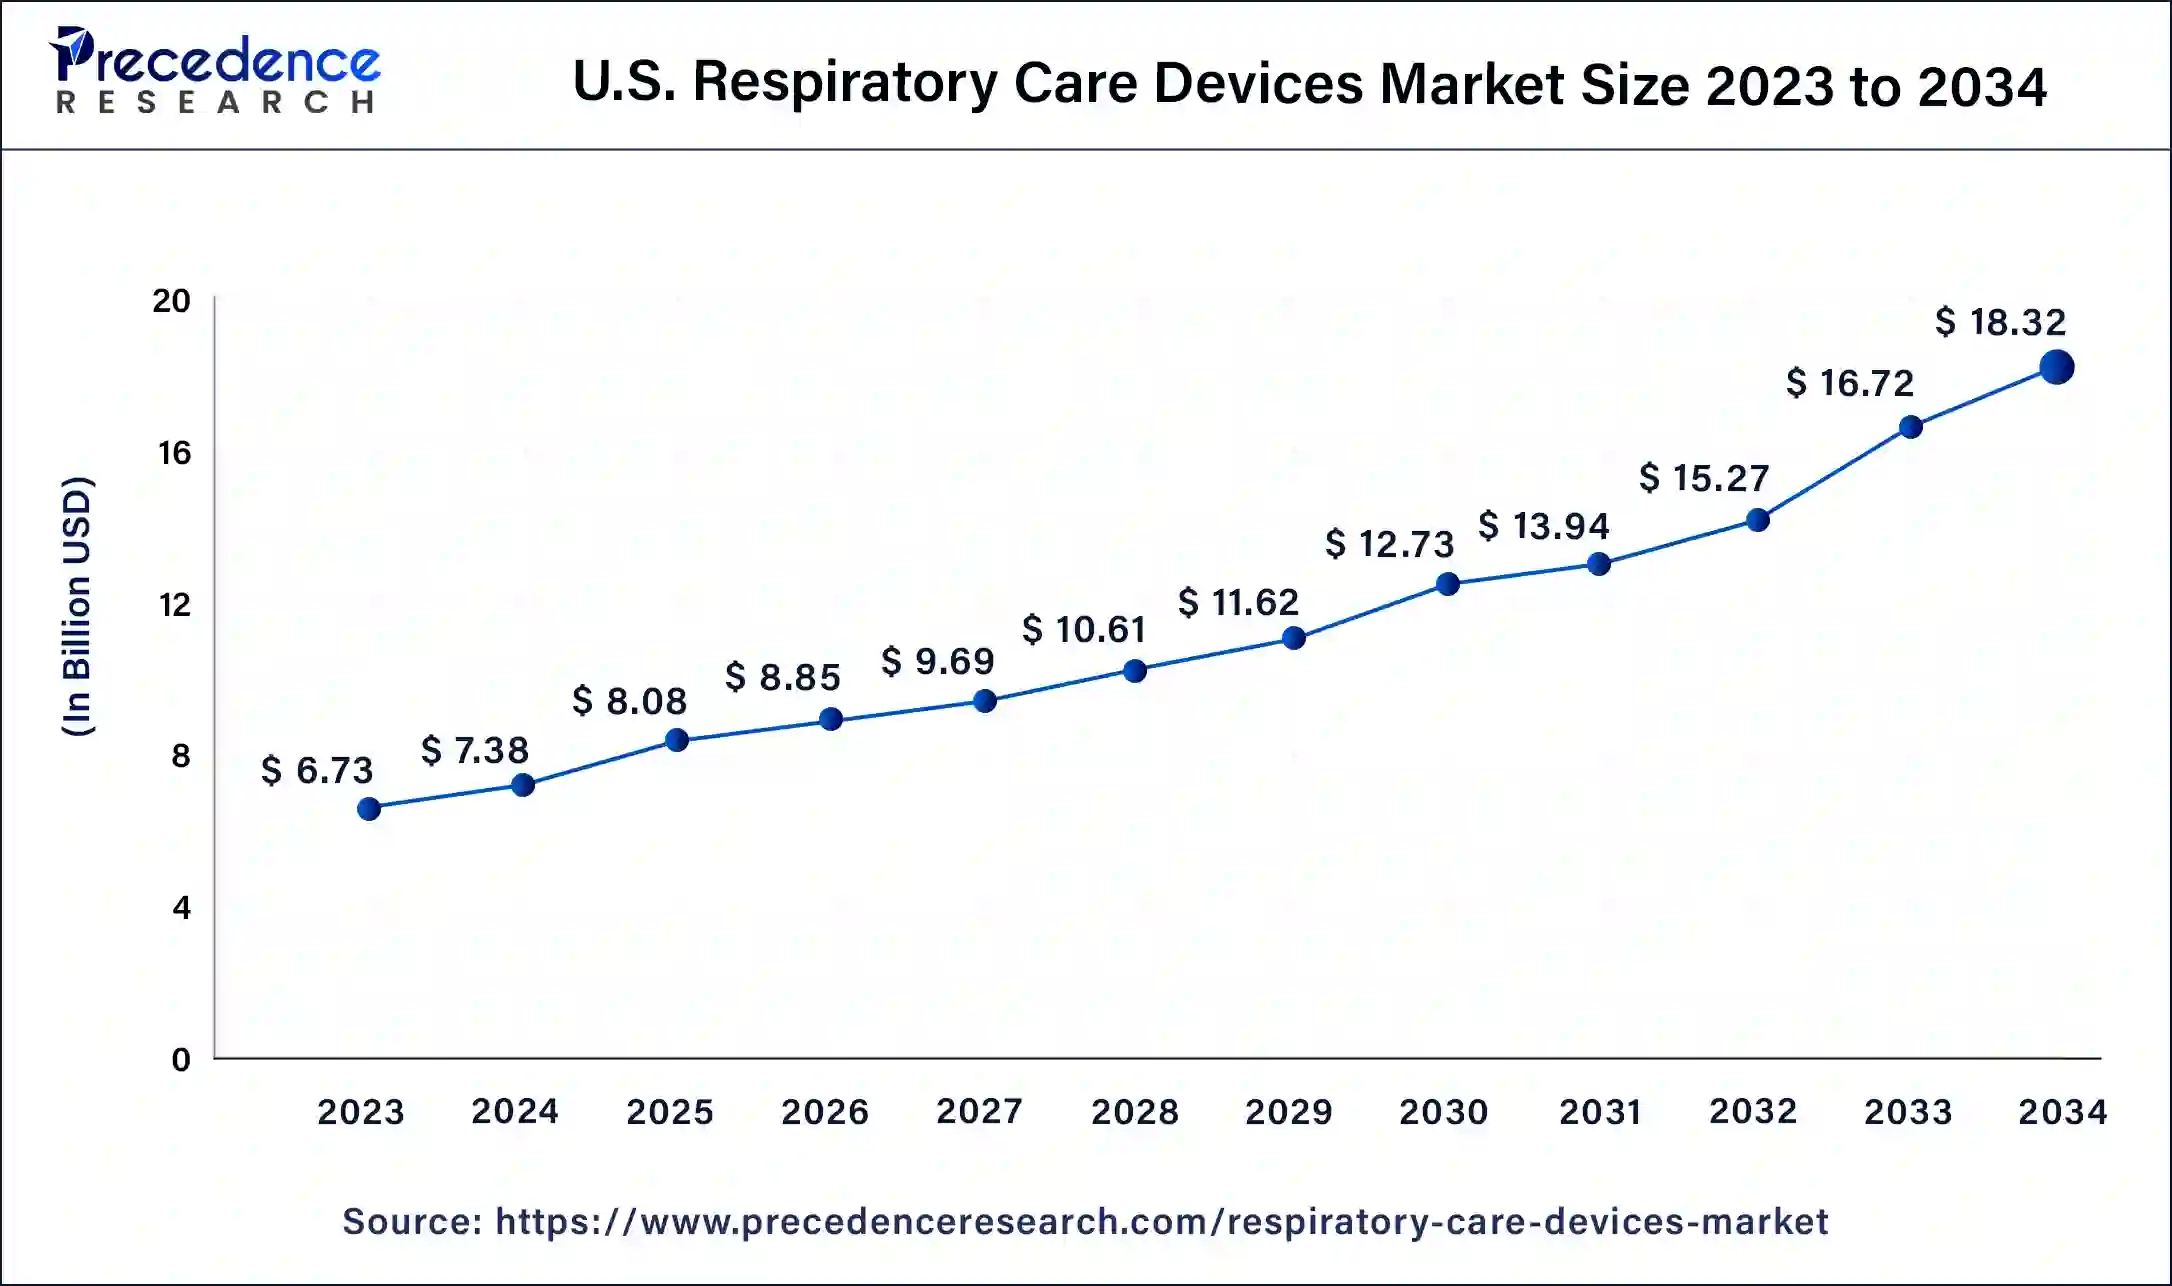 U.S. Respiratory Care Devices Market Size 2024 to 2034